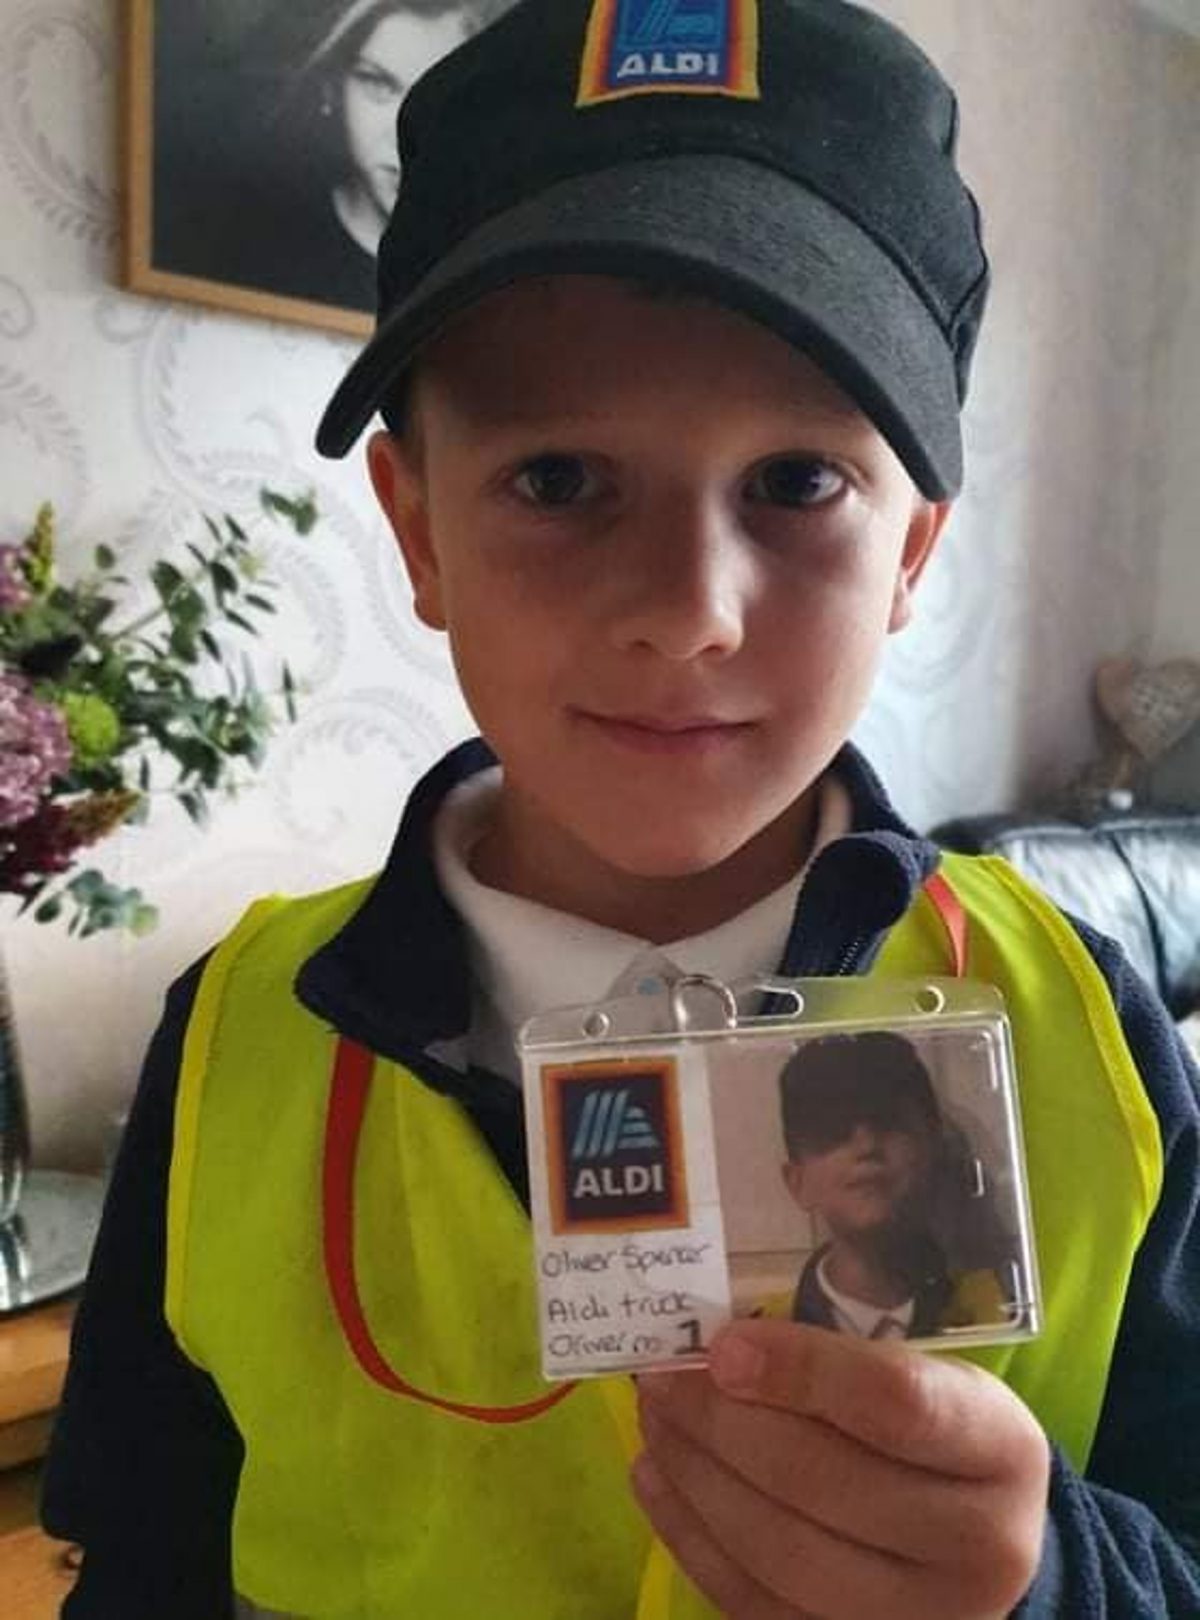 Oliver poses with the lanyard on his Aldi HGV driver costume.